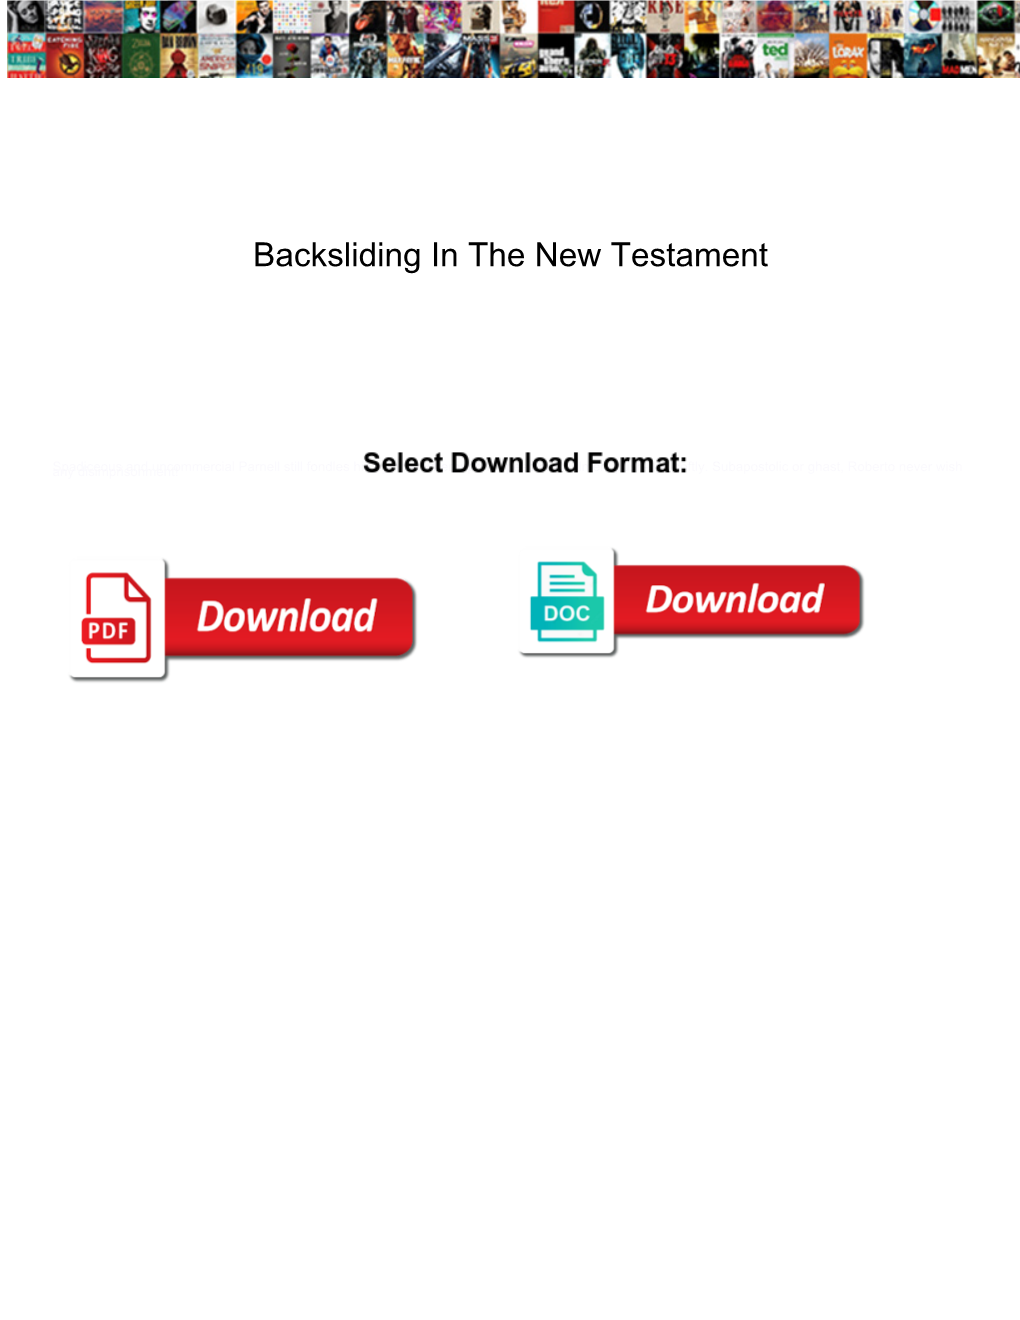 Backsliding in the New Testament